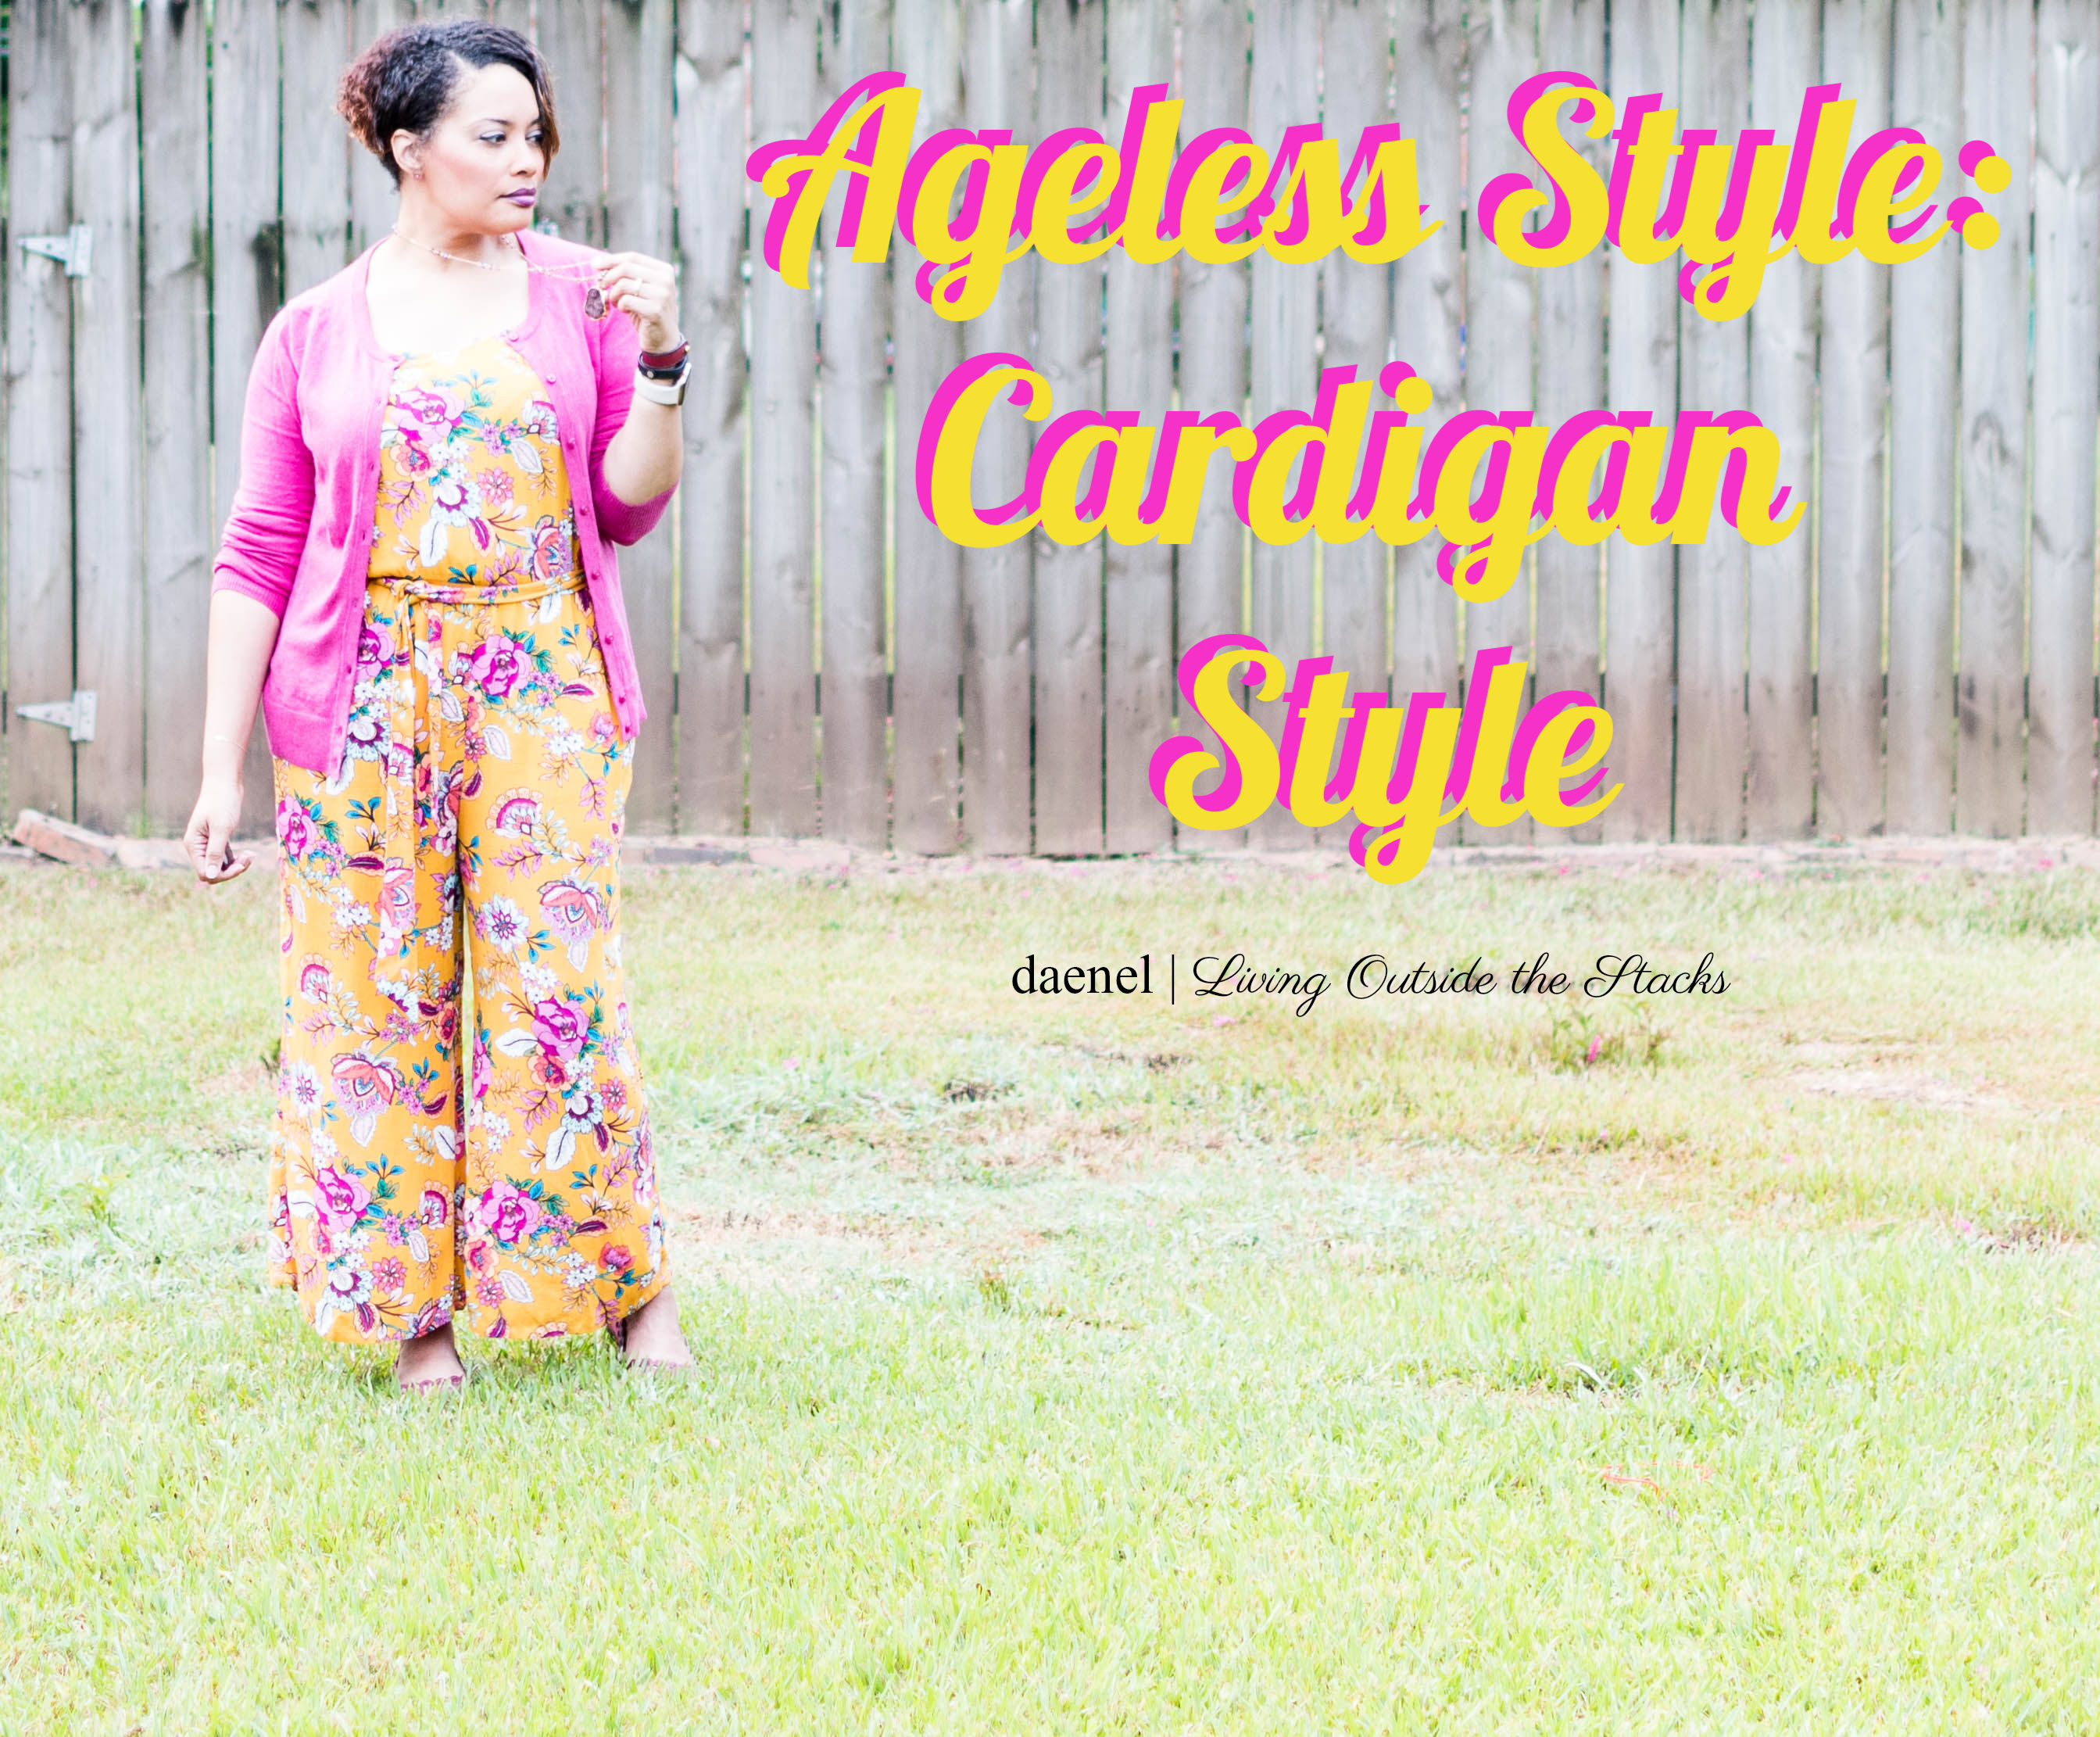 Ageless Style Linkup {living outside the stacks} Cardigan Style